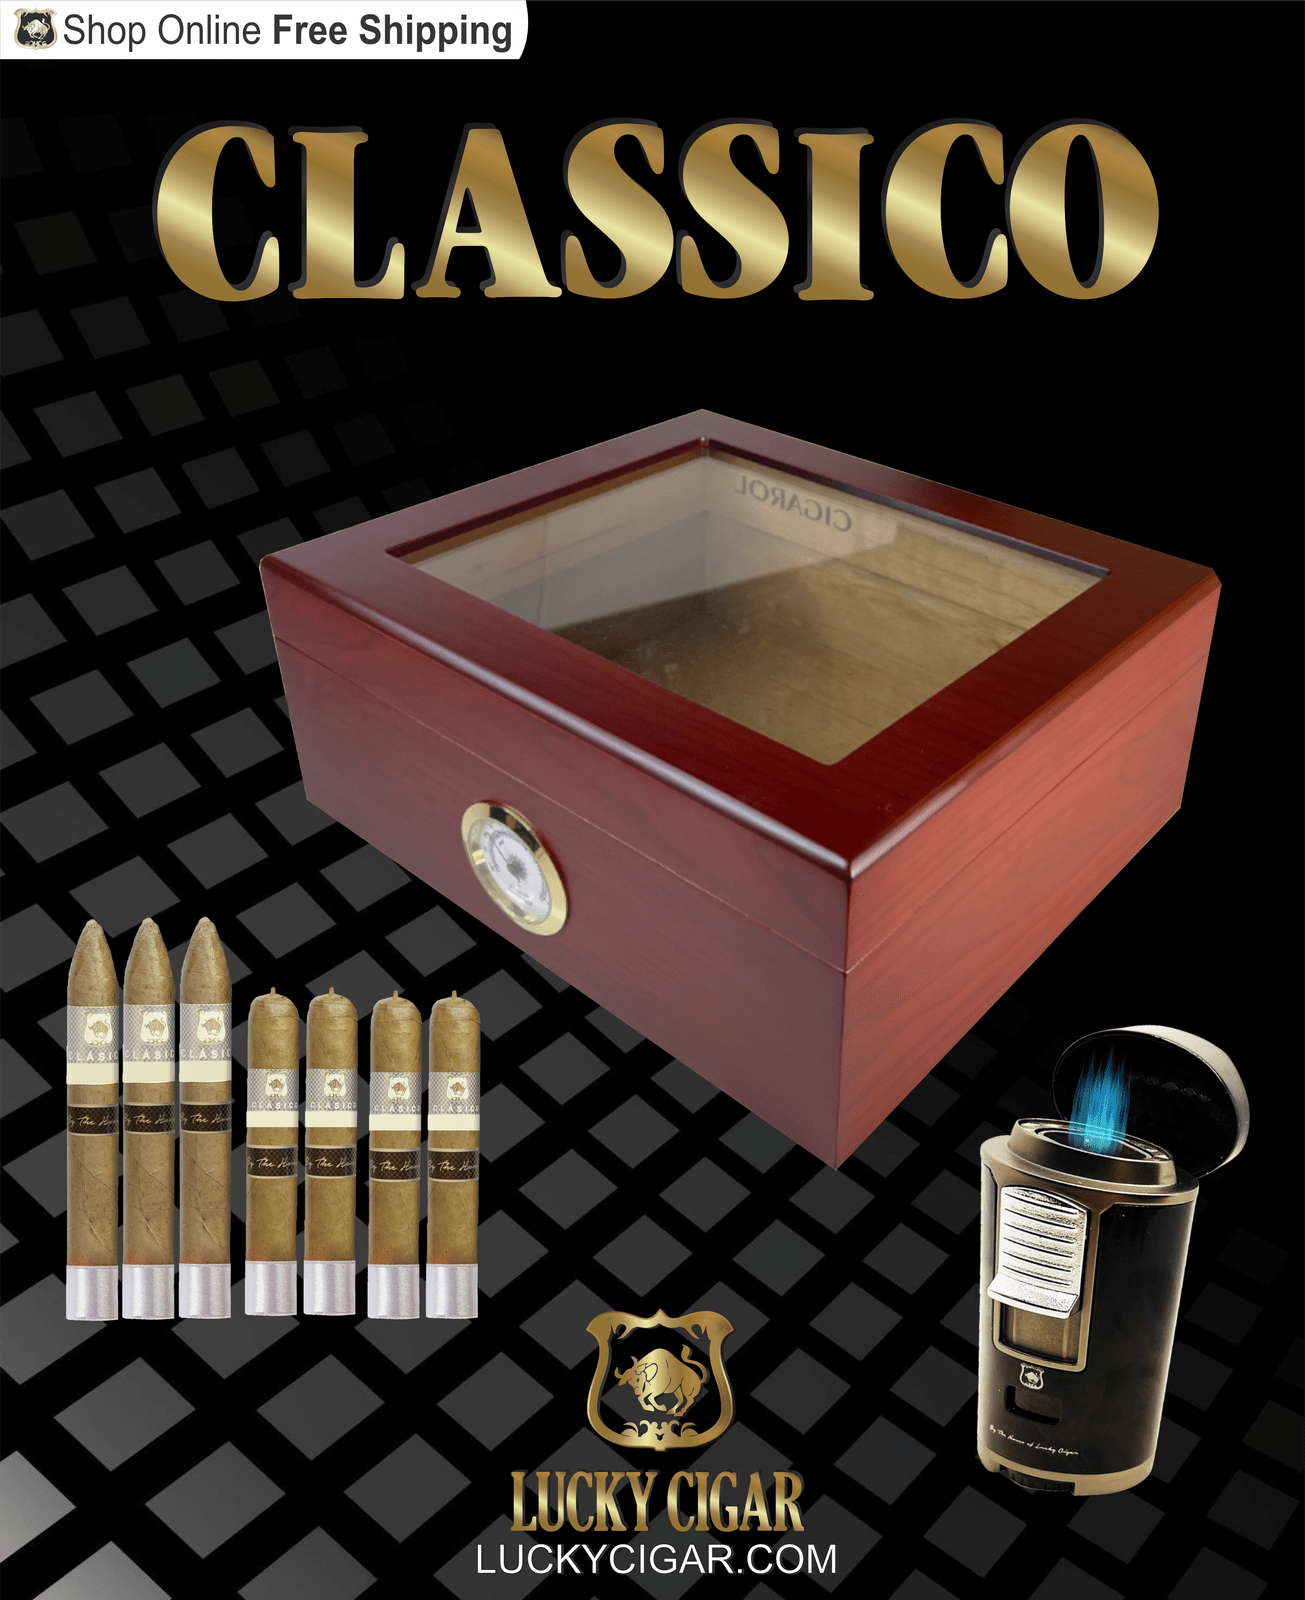 Lucky Cigar Sampler Sets: Set of 7 Classico Cigars with Torch, Desk Humidor